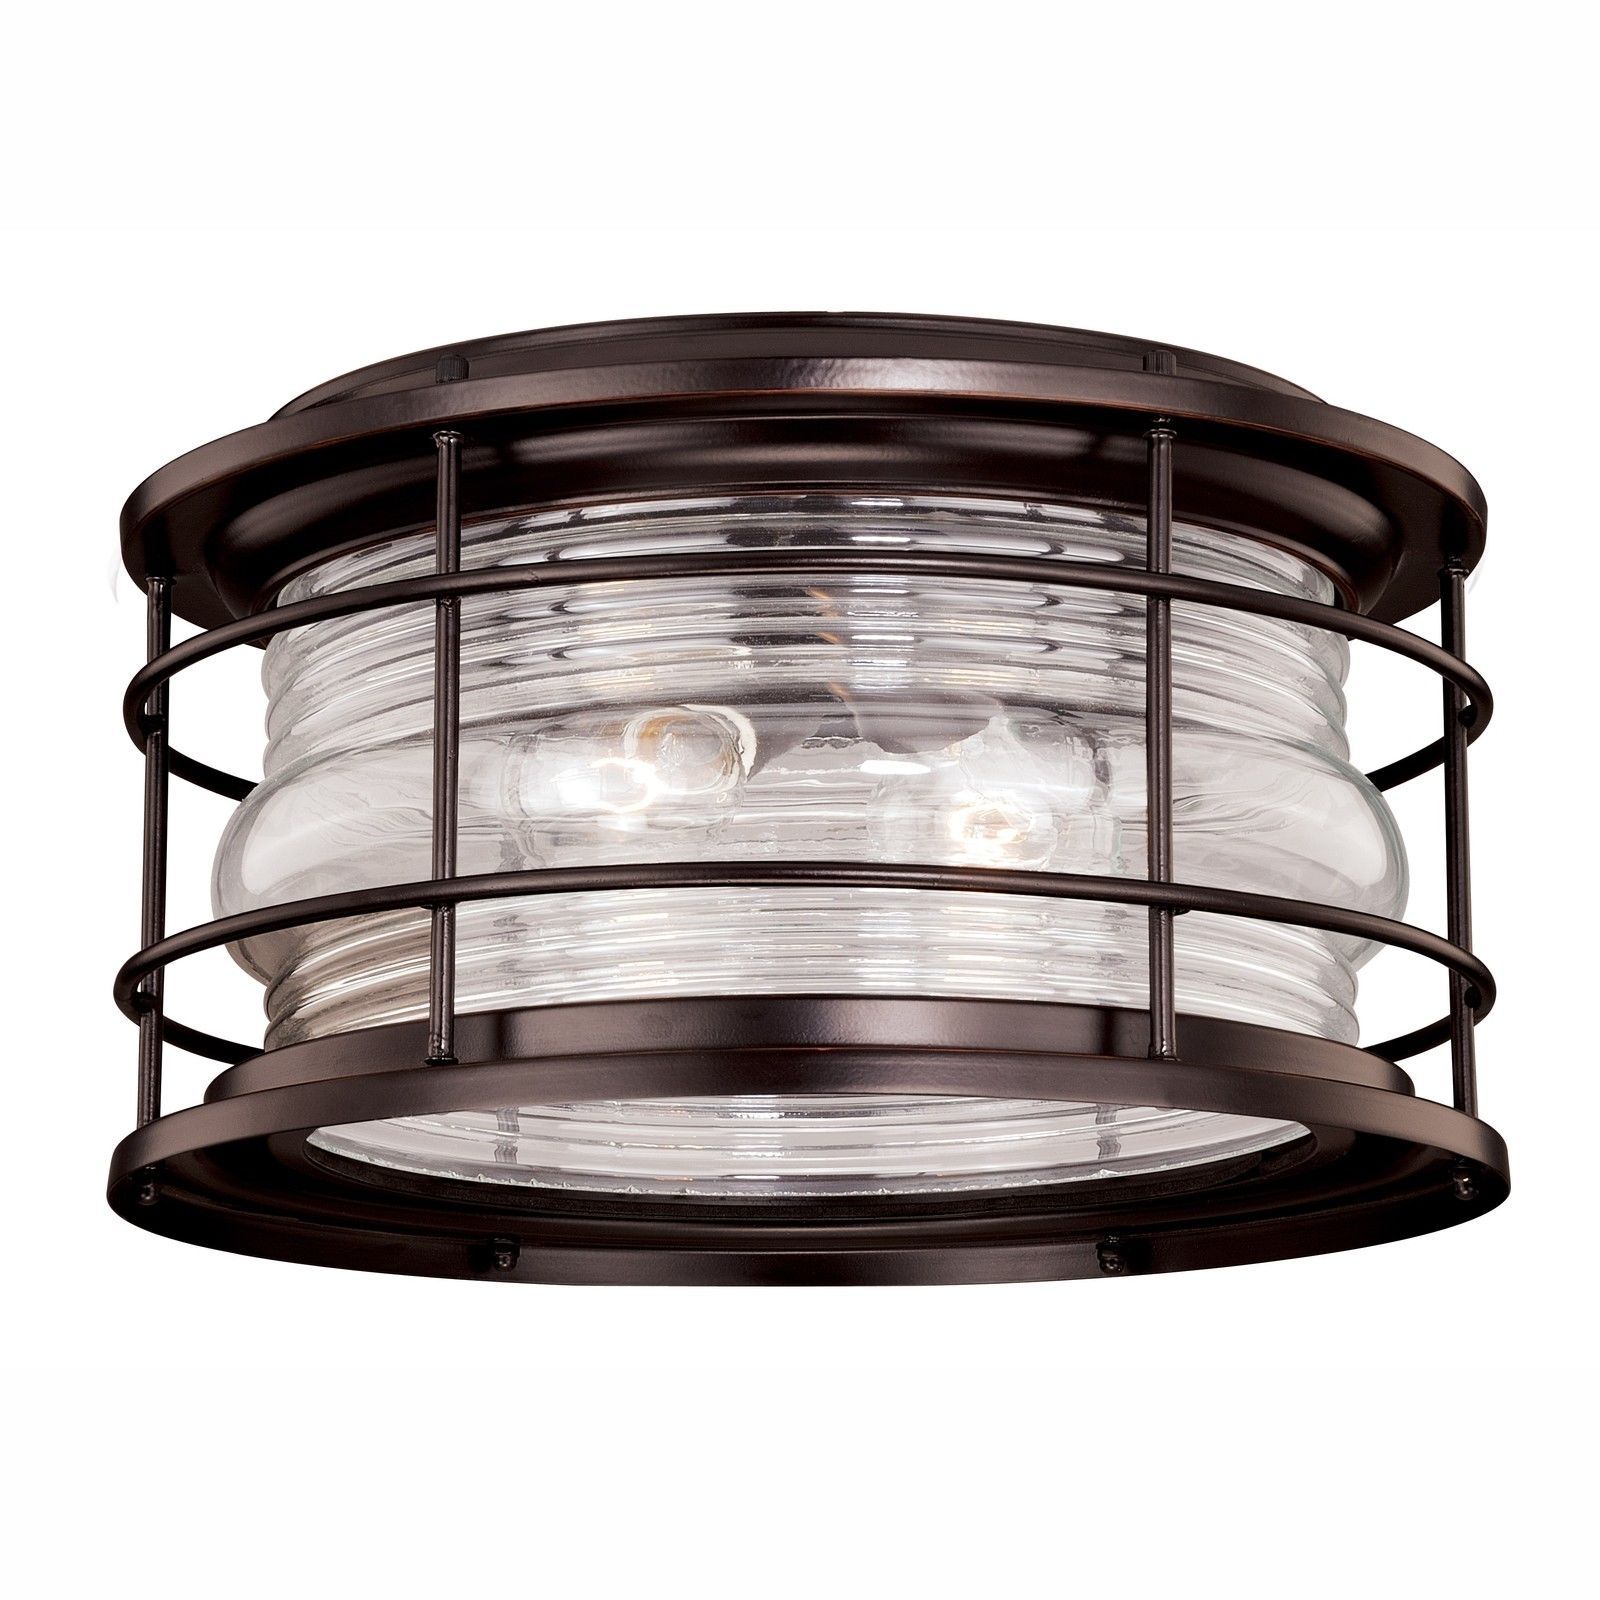 Vaxcel Lighting T0166 Hyannis Outdoor Ceiling Light In Burnished Throughout Bronze Outdoor Ceiling Lights (View 13 of 15)